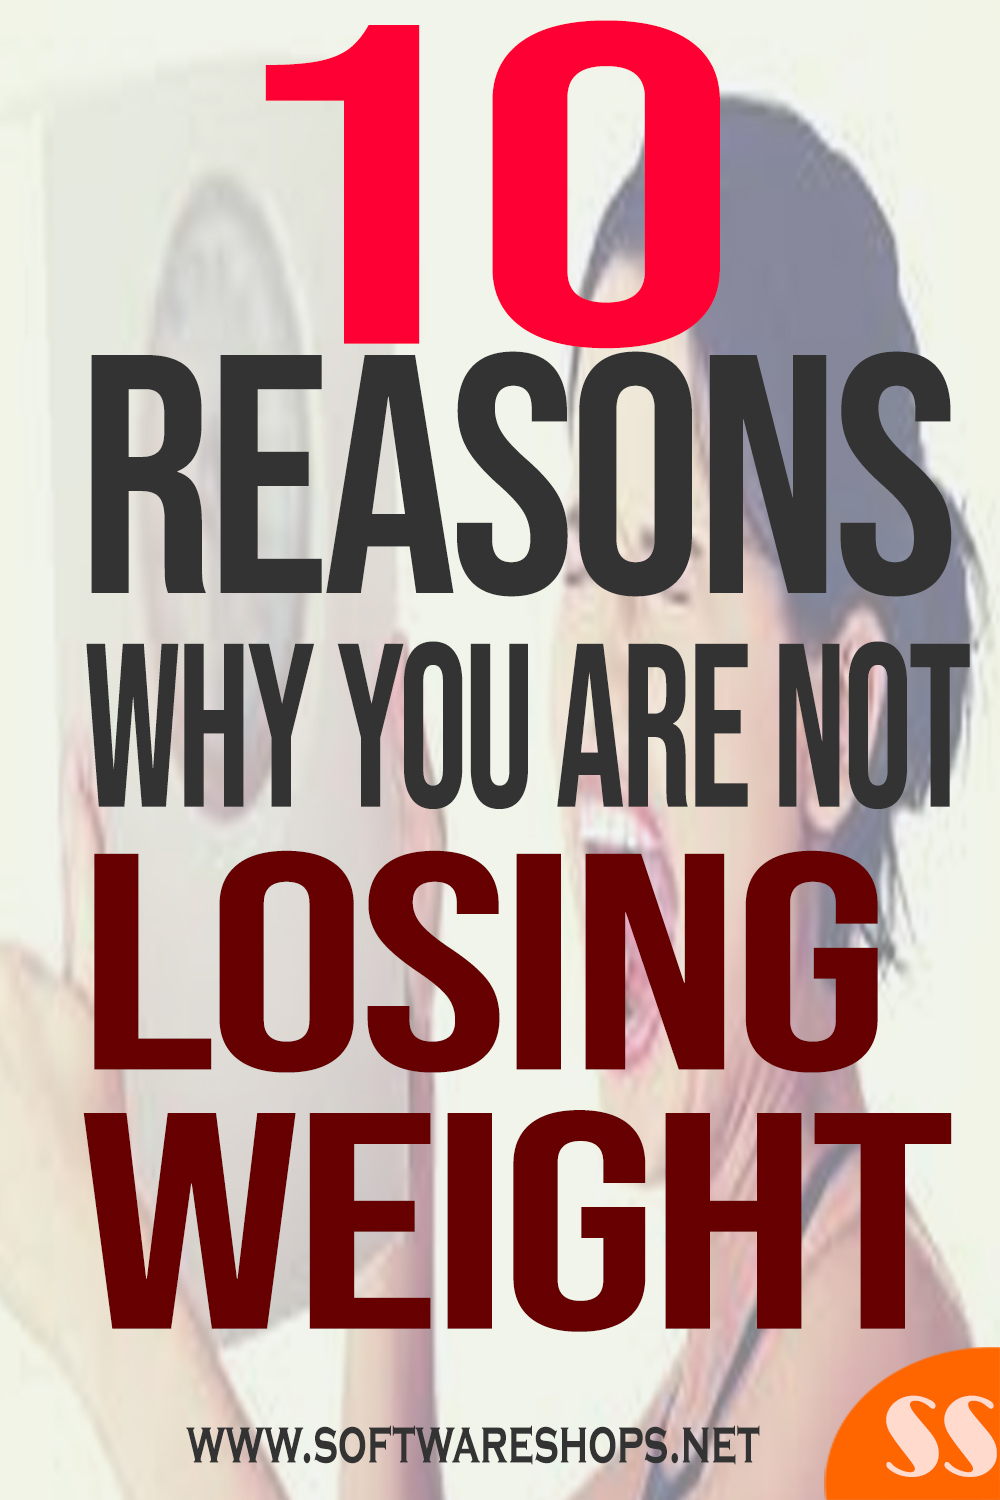 10 Reasons Why You Are Not Losing Weight – Here’s The Solution